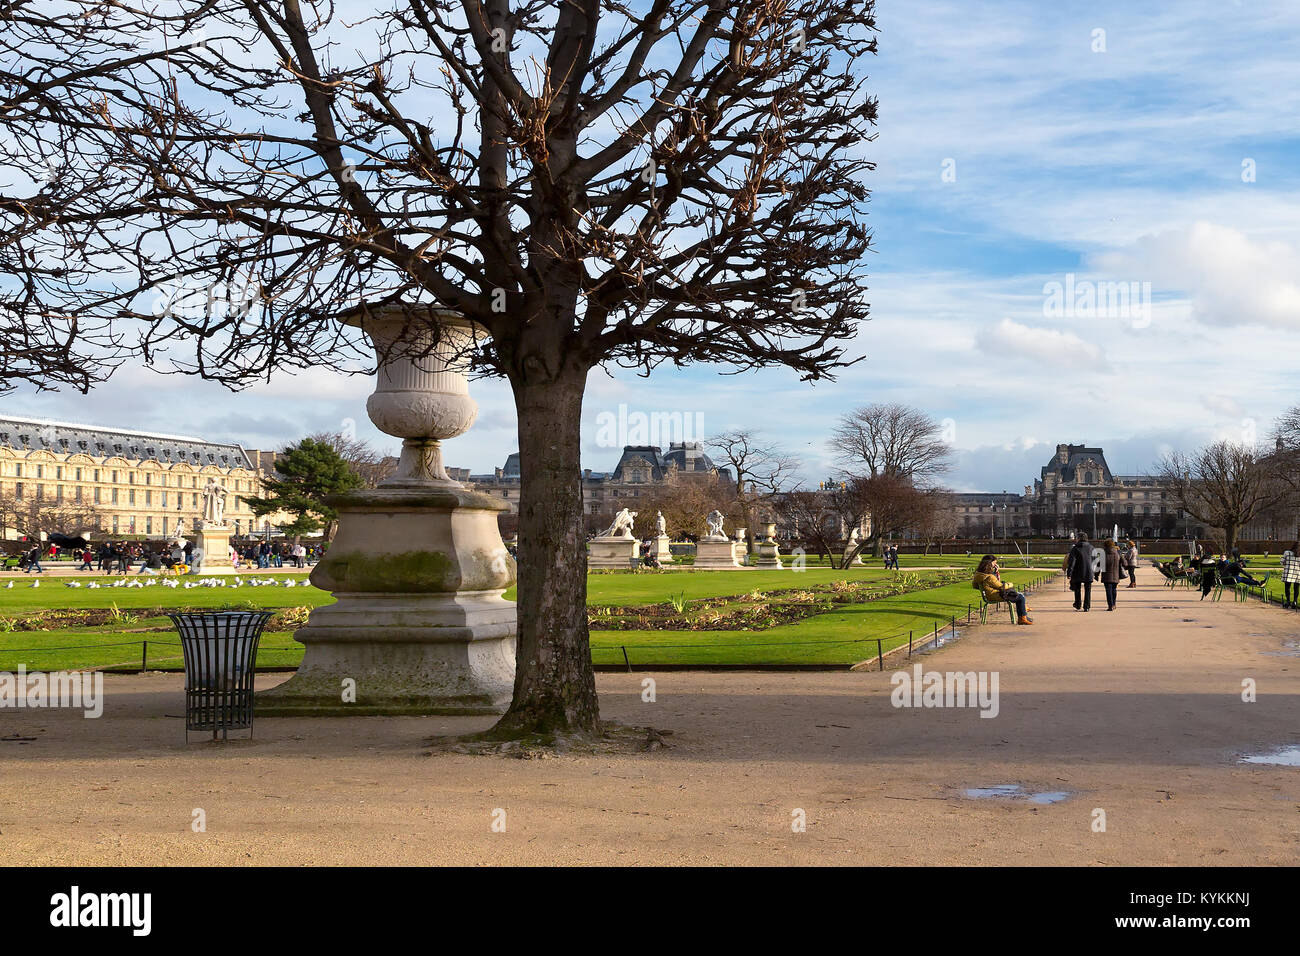 Paris Tuileries Gardens in winter. Tree pruned into formal square shape in the foreground. Stock Photo